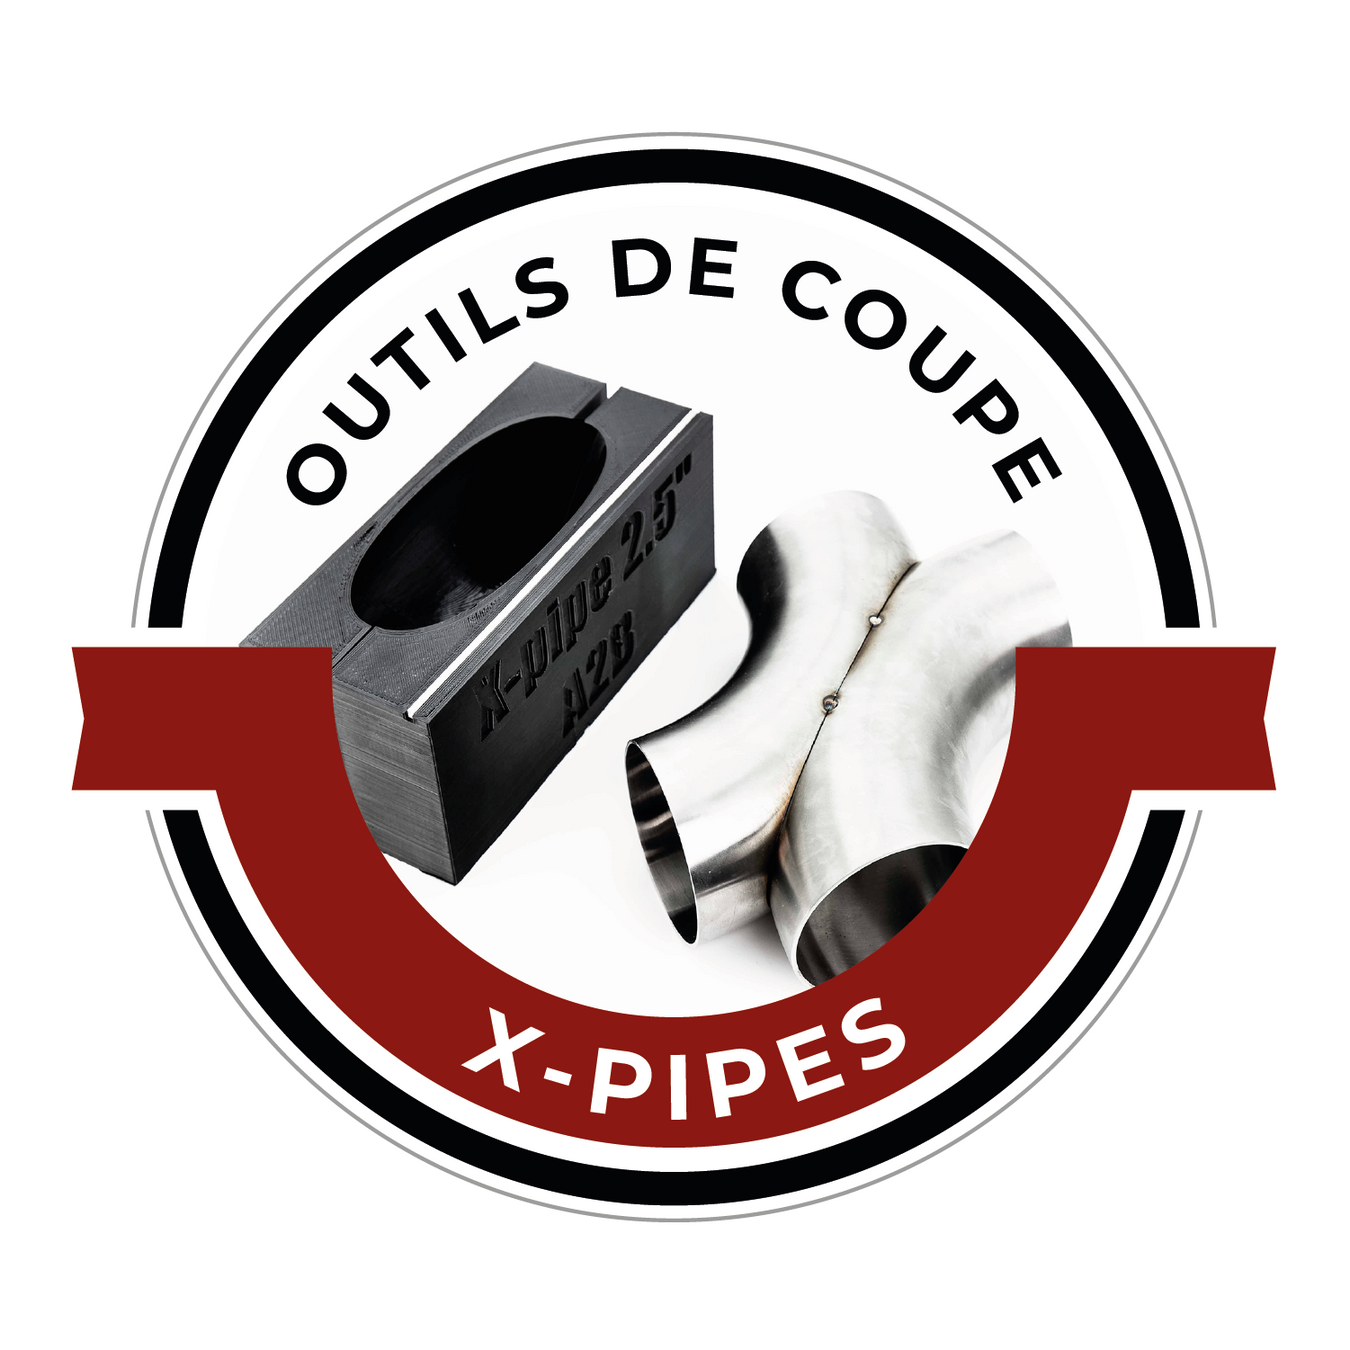 Outils de coupe - X-Pipes